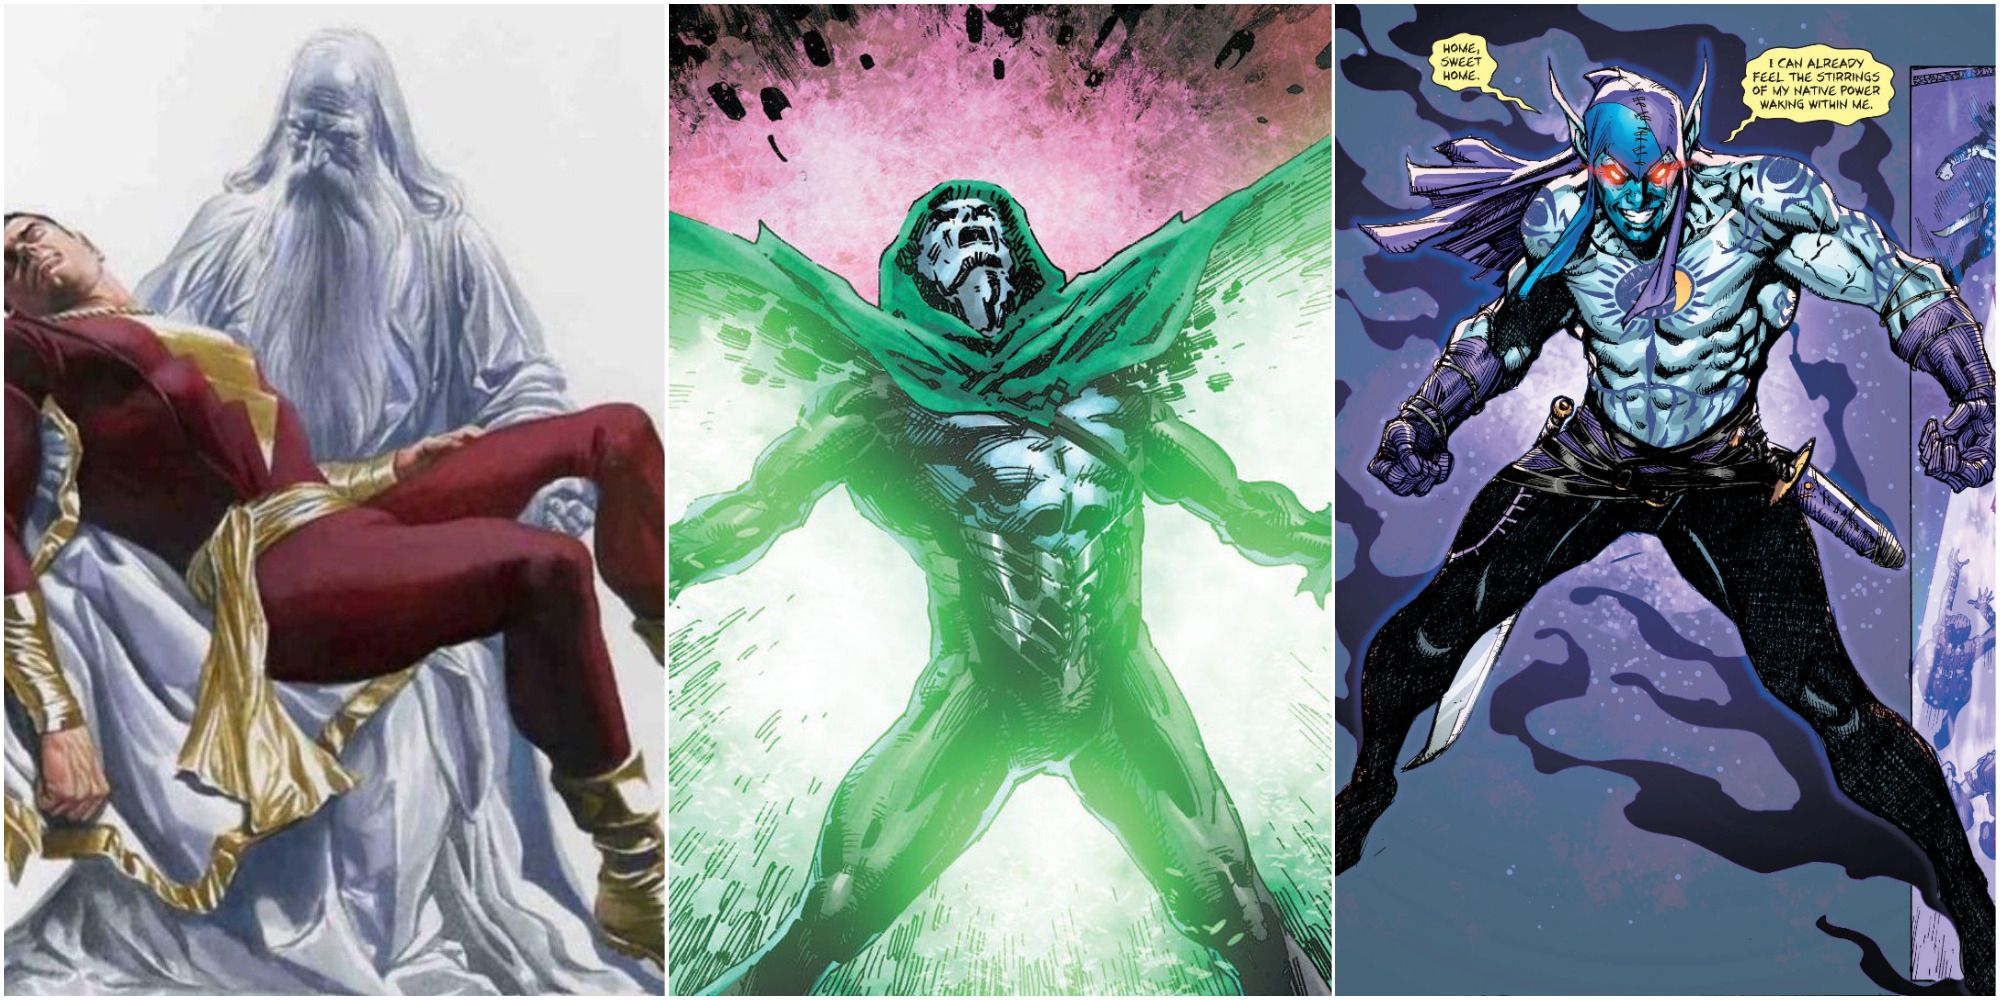 The Wizard Shazam, Spectre, and Eclipso